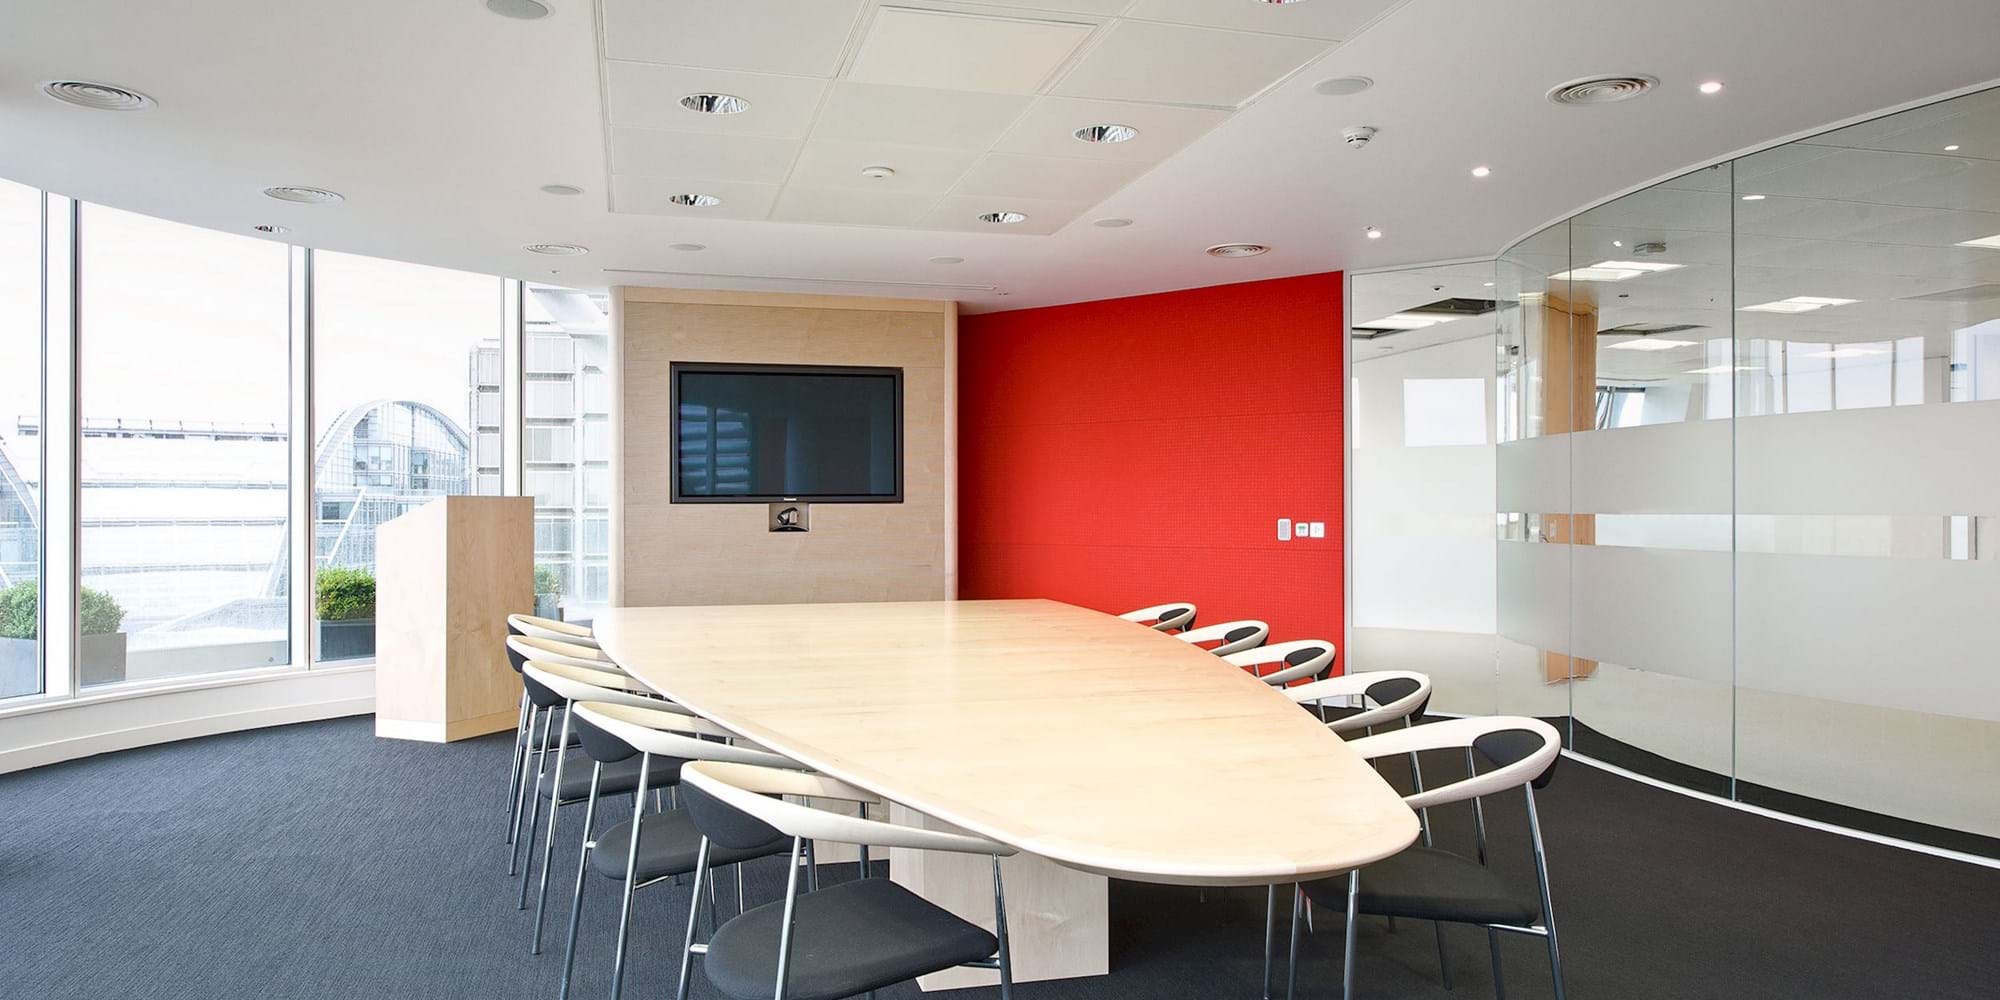 Modus Workspace office design, fit out and refurbishment - G4S - Meeting Room - GS4_04_highres_jpg_sRGB.jpg